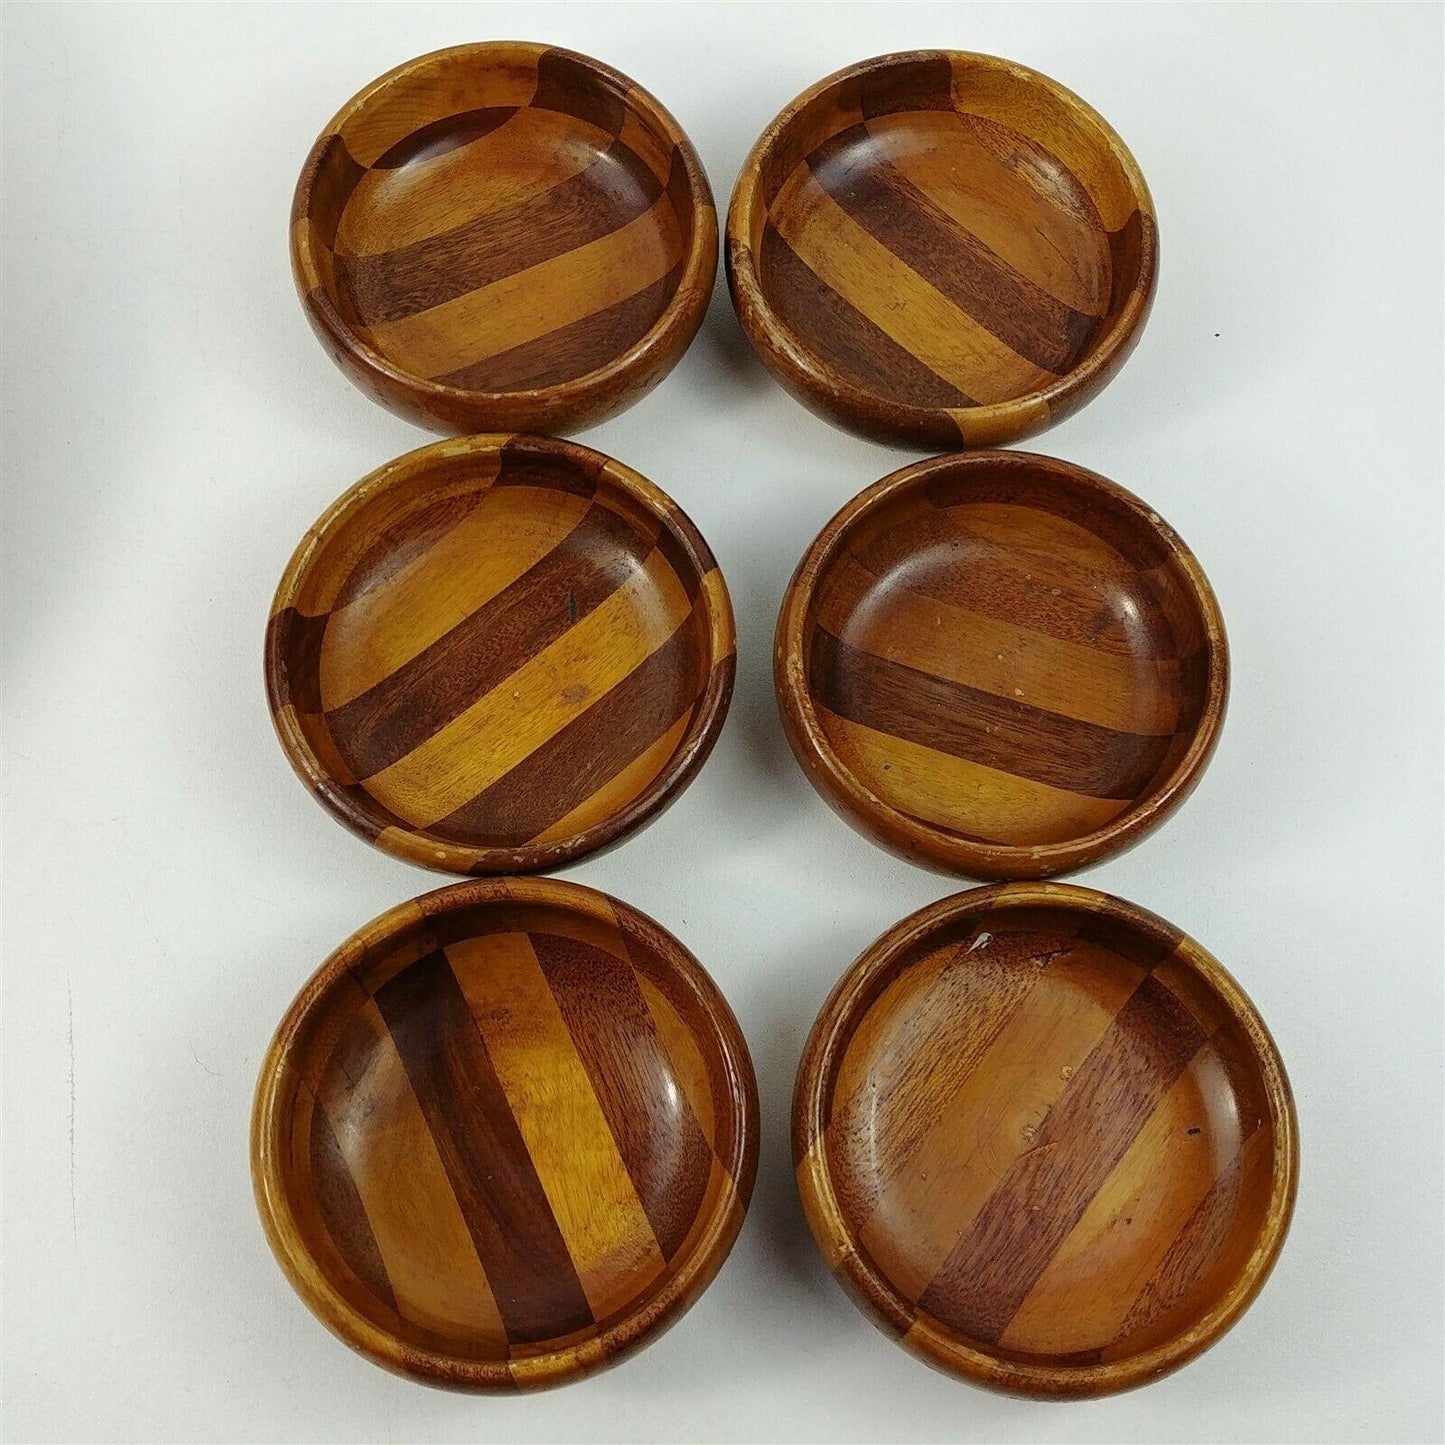 Bowl Handcrafted Wood 12" Multi Colored Woods w/ 6 Serving & Crackers